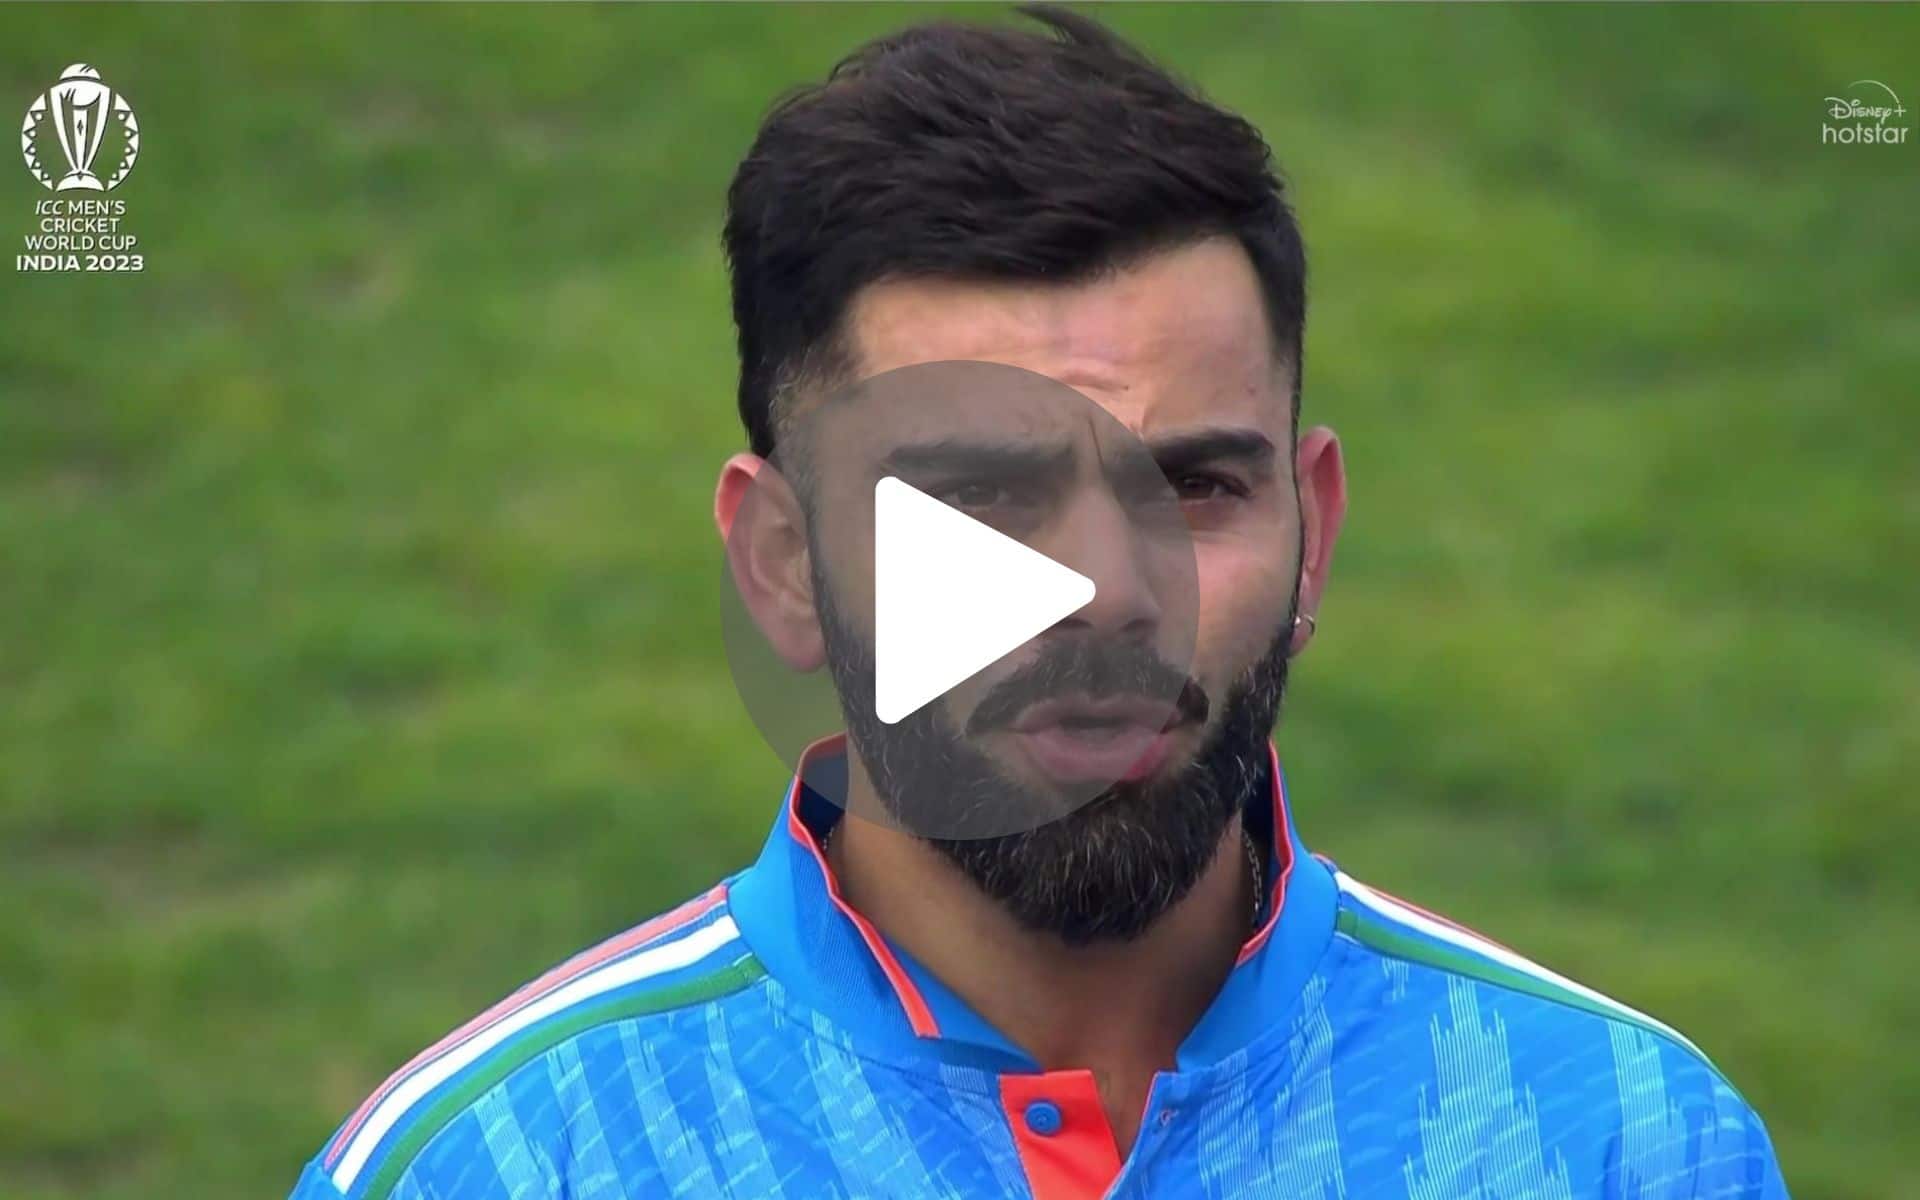 [Watch] Virat Kohli Shares What Hearing National Anthem During Major Events Does To Him